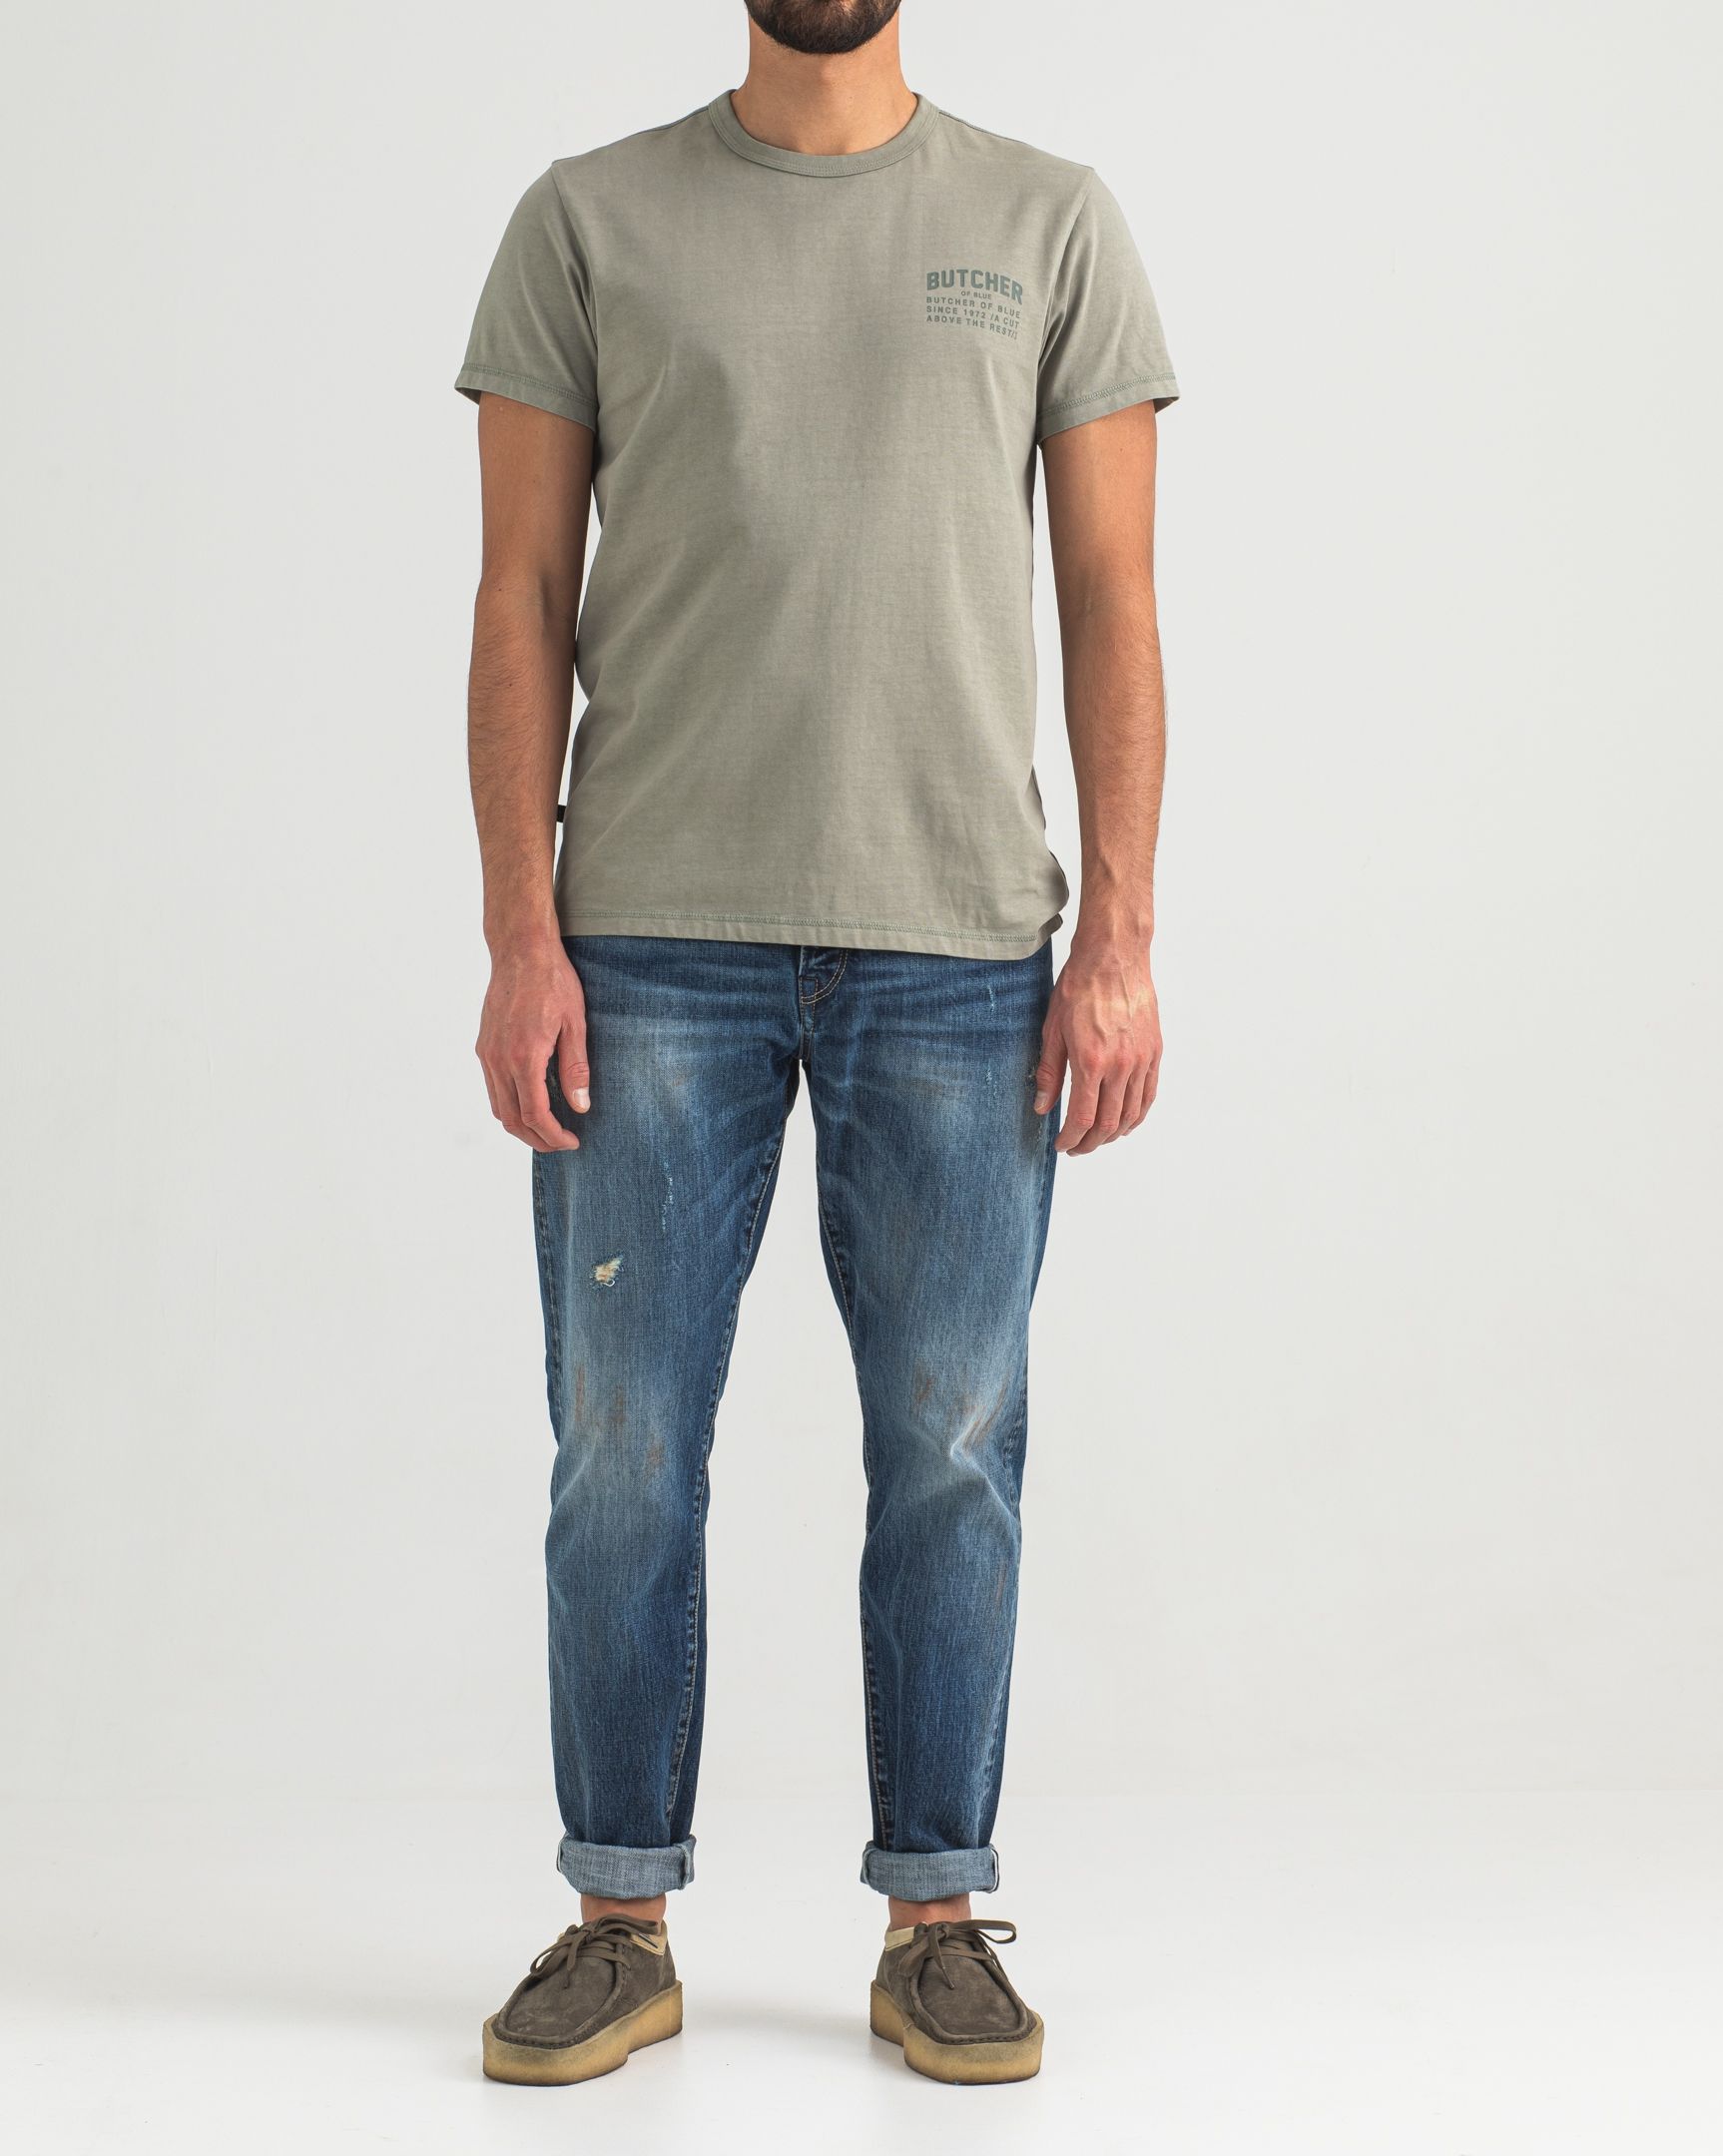 Army Rest Tee